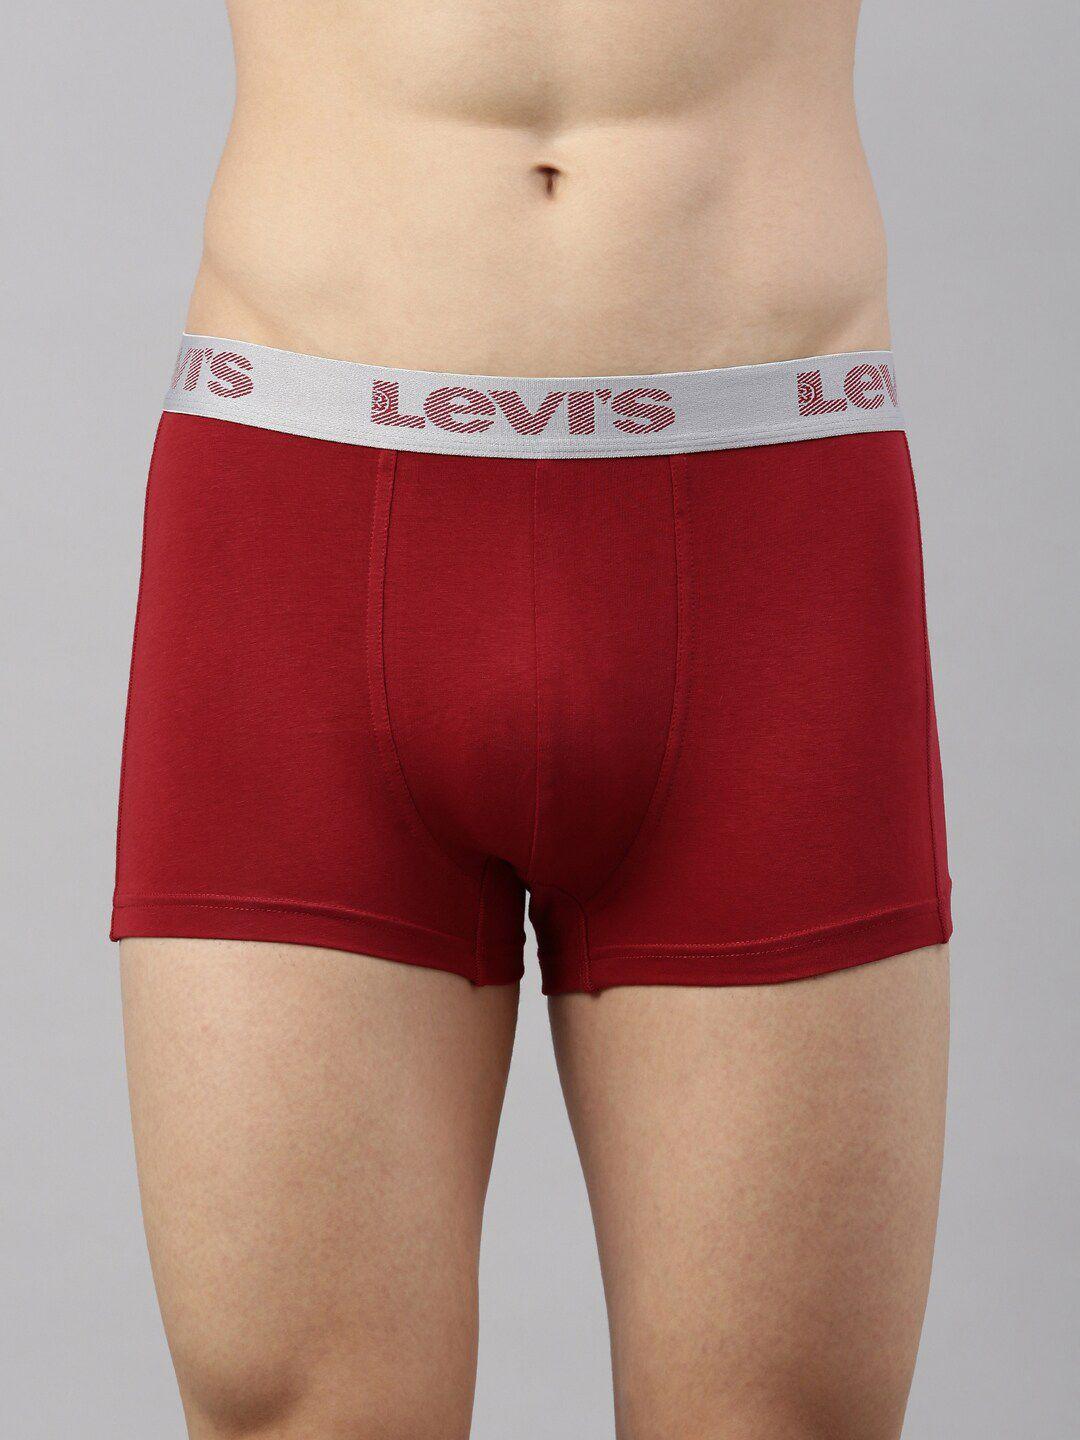 levis-men-smartskin-technology-cotton-active-trunks-with-tag-free-comfort-067